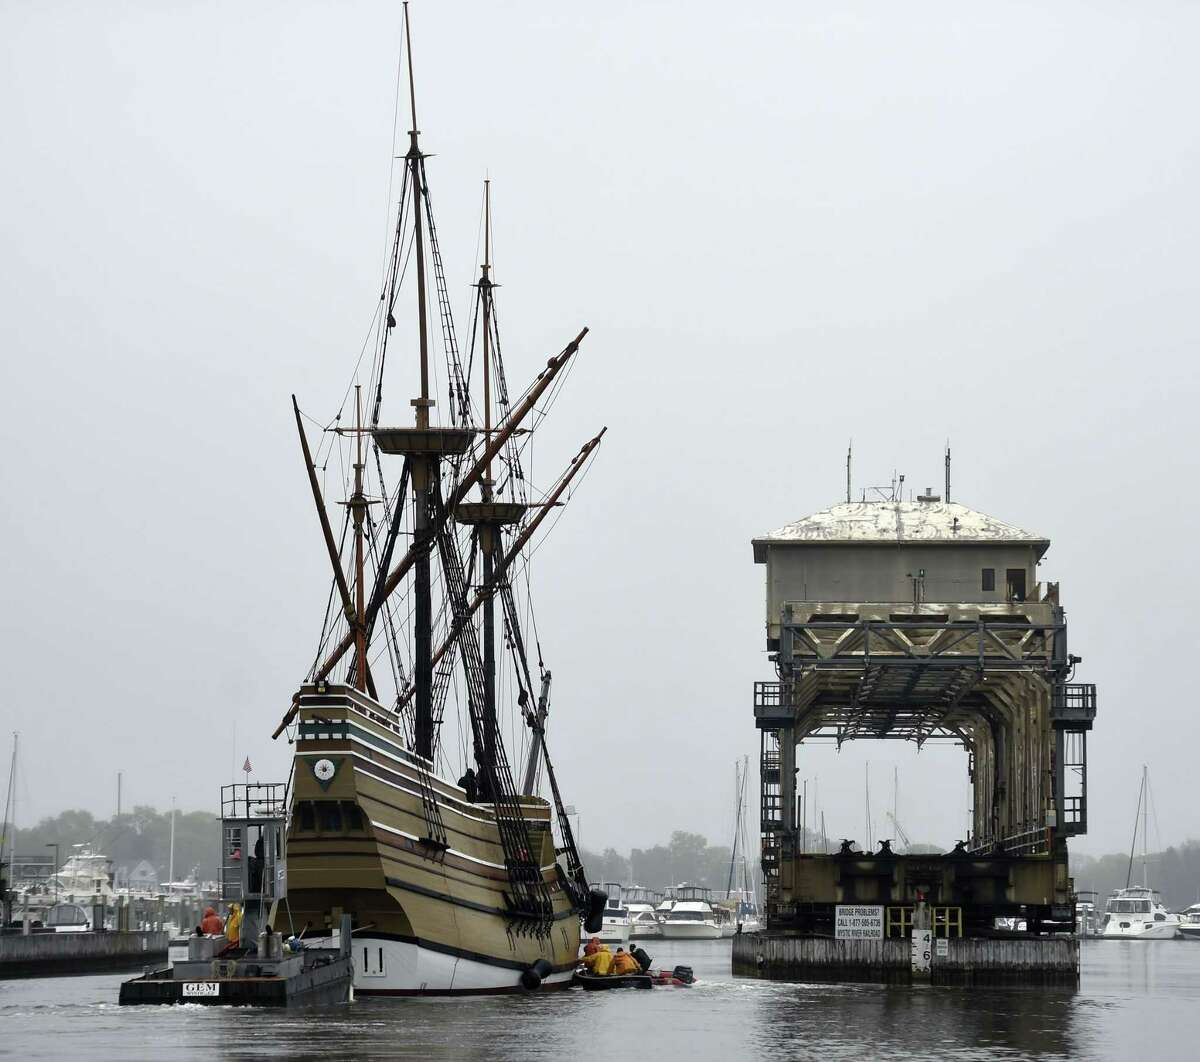 Towed by the tug Jaguar with support from Gwenmore Marine and Mystic Seaport waterfront small craft, the Mayflower II, a 1957 replica of the ship that carried the Pilgrims to Massachusetts in 1620, passes the Mystic River railroad bridge during the transit of the Mystic River, Tuesday, May 19, 2015 in Mystic, Conn. The ship, which is being restored at the Mystic Seaport's Henry B. duPont Preservation Shipyard in a cooperative effort between the Seaport and Plimoth Plantation, is en route back to Plymouth, Mass., for the summer tourism season and will return in the fall for another winter of work. (Sean D. Elliot/The Day via AP) MANDATORY CREDIT